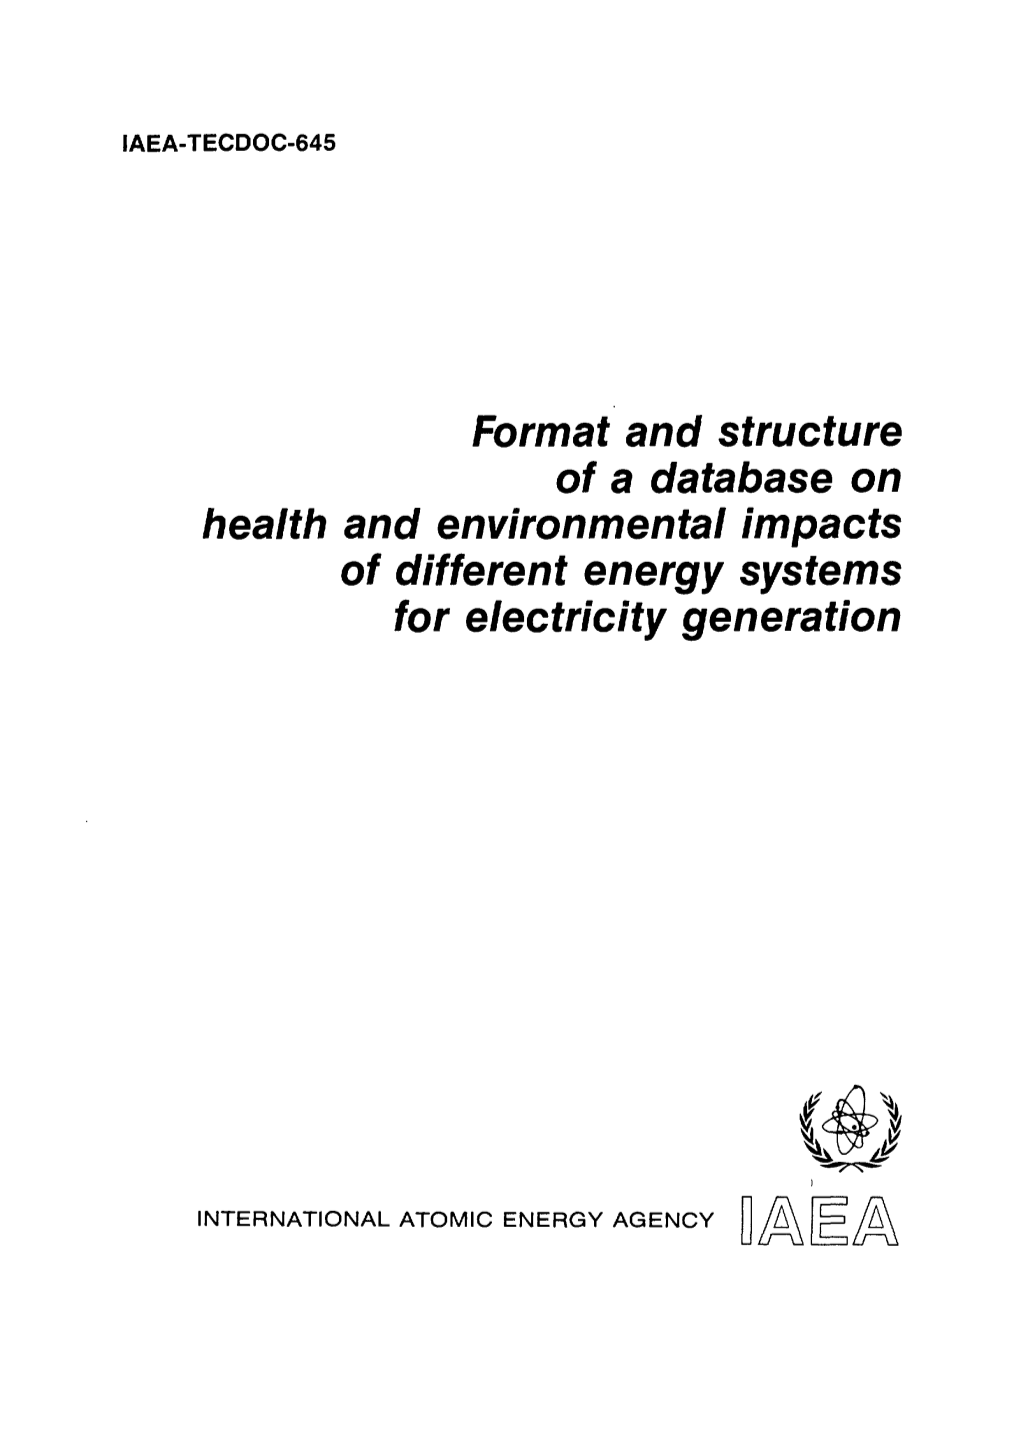 Format and Structure of a Database on Health and Environmental Impacts of Different Energy Systems for Electricity Generation